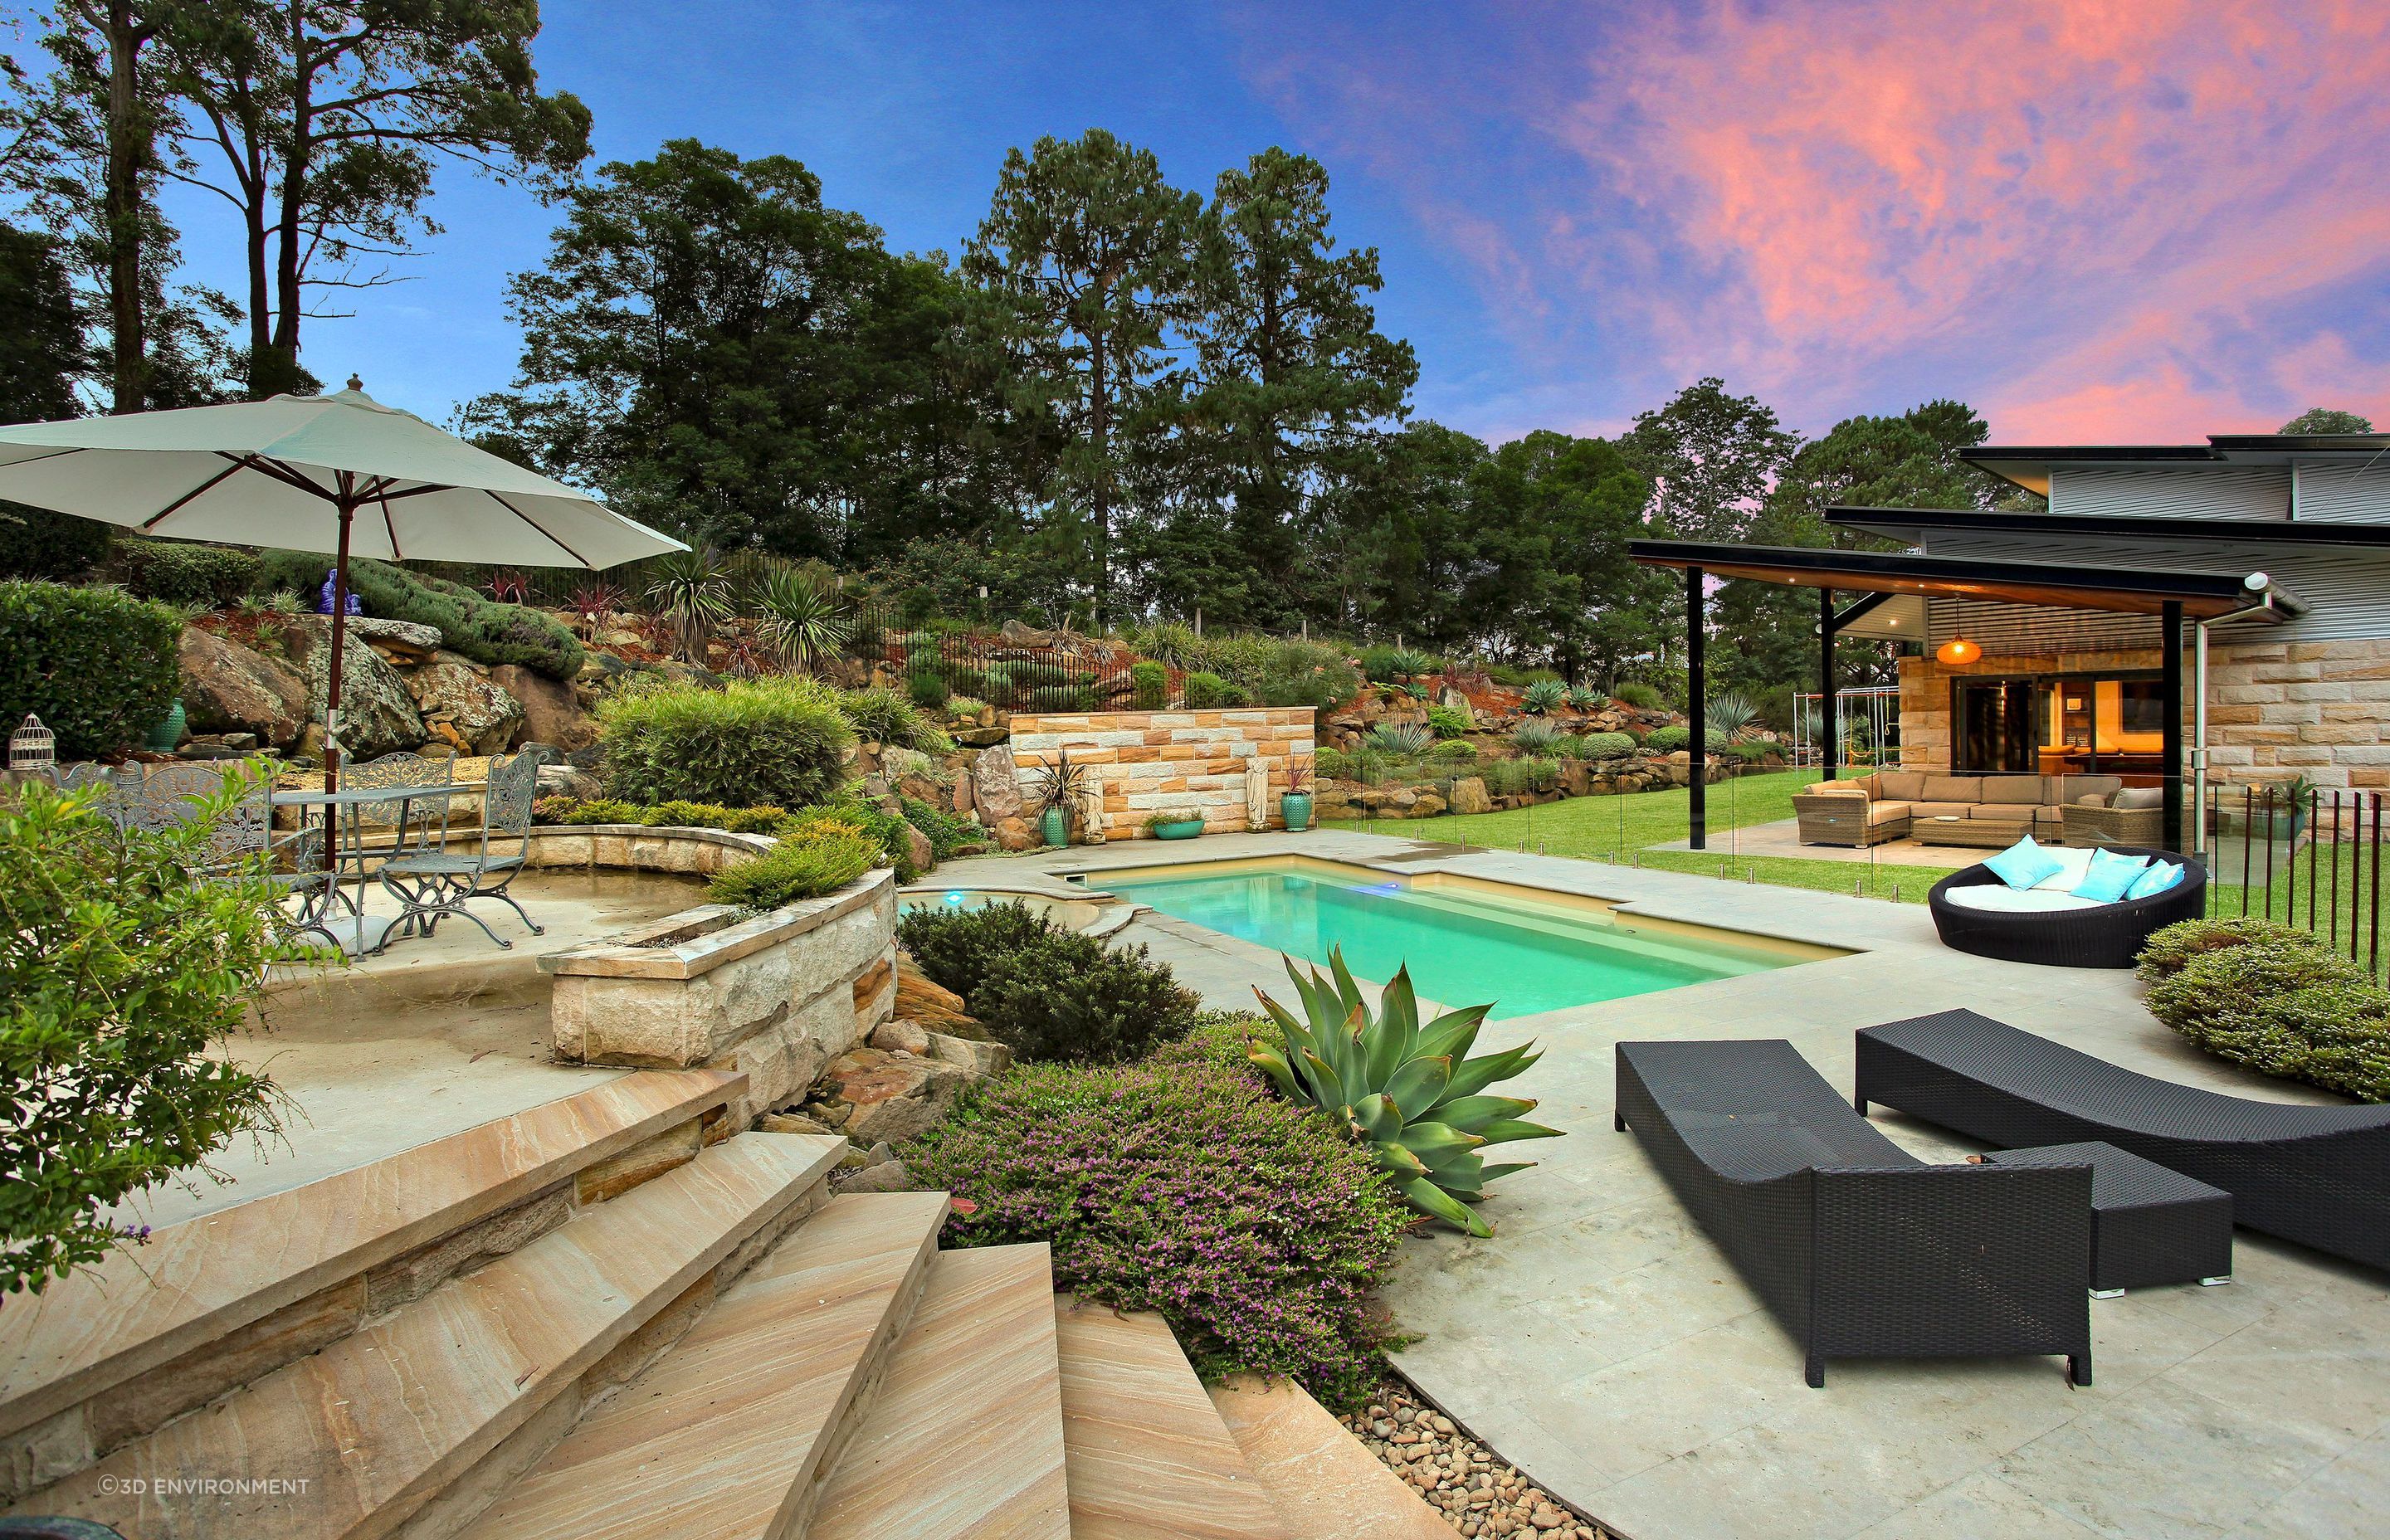 This luxury pool is set in a secluded setting. Featured project: Grose Vale - 3D Environment